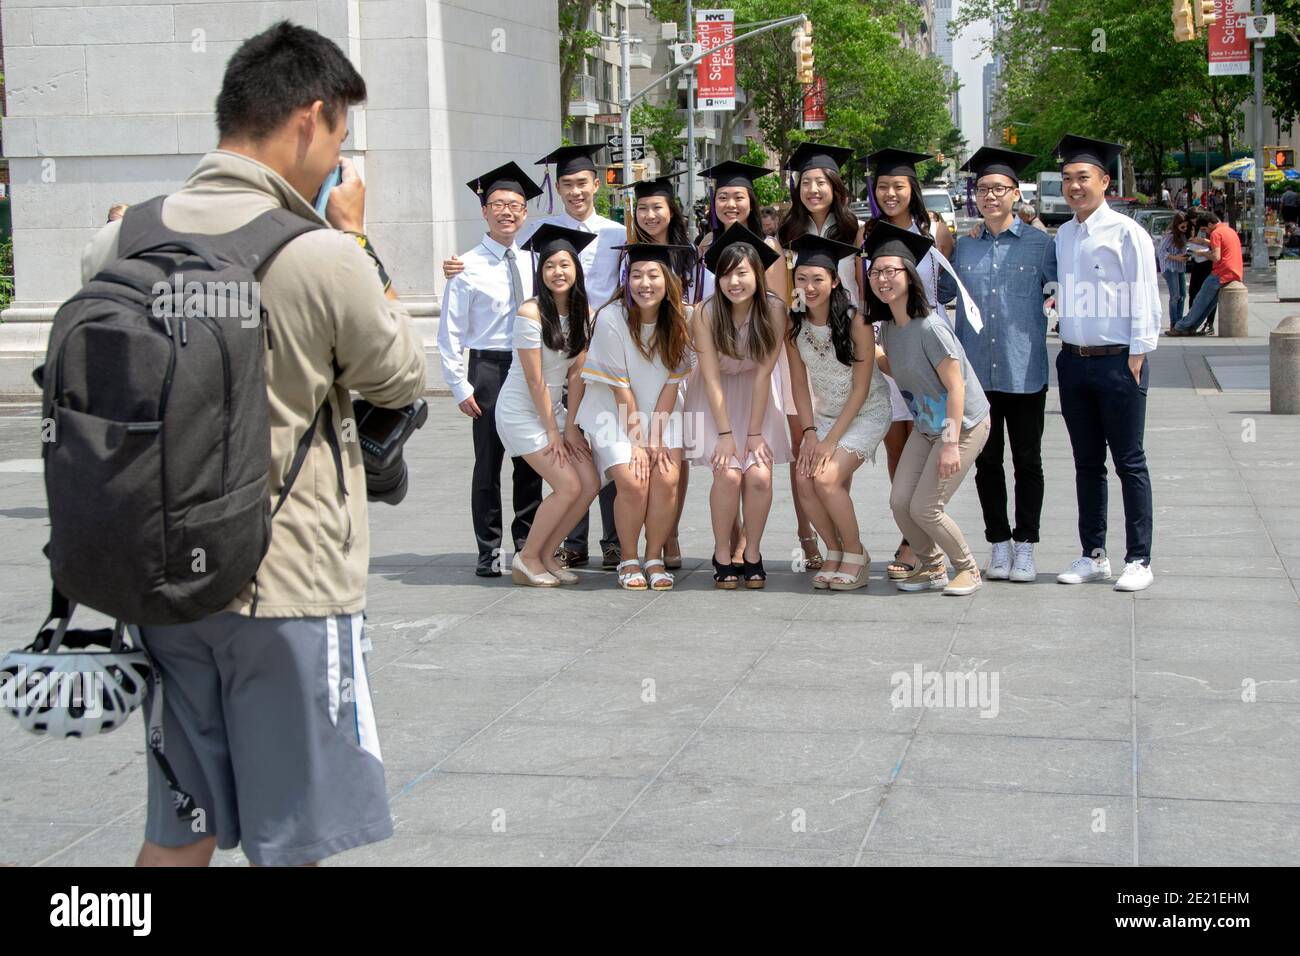 Asian NYU graduates wearing their graduation caps pose for a group photo in Washington Square Park in New York City.2016, Stock Photo